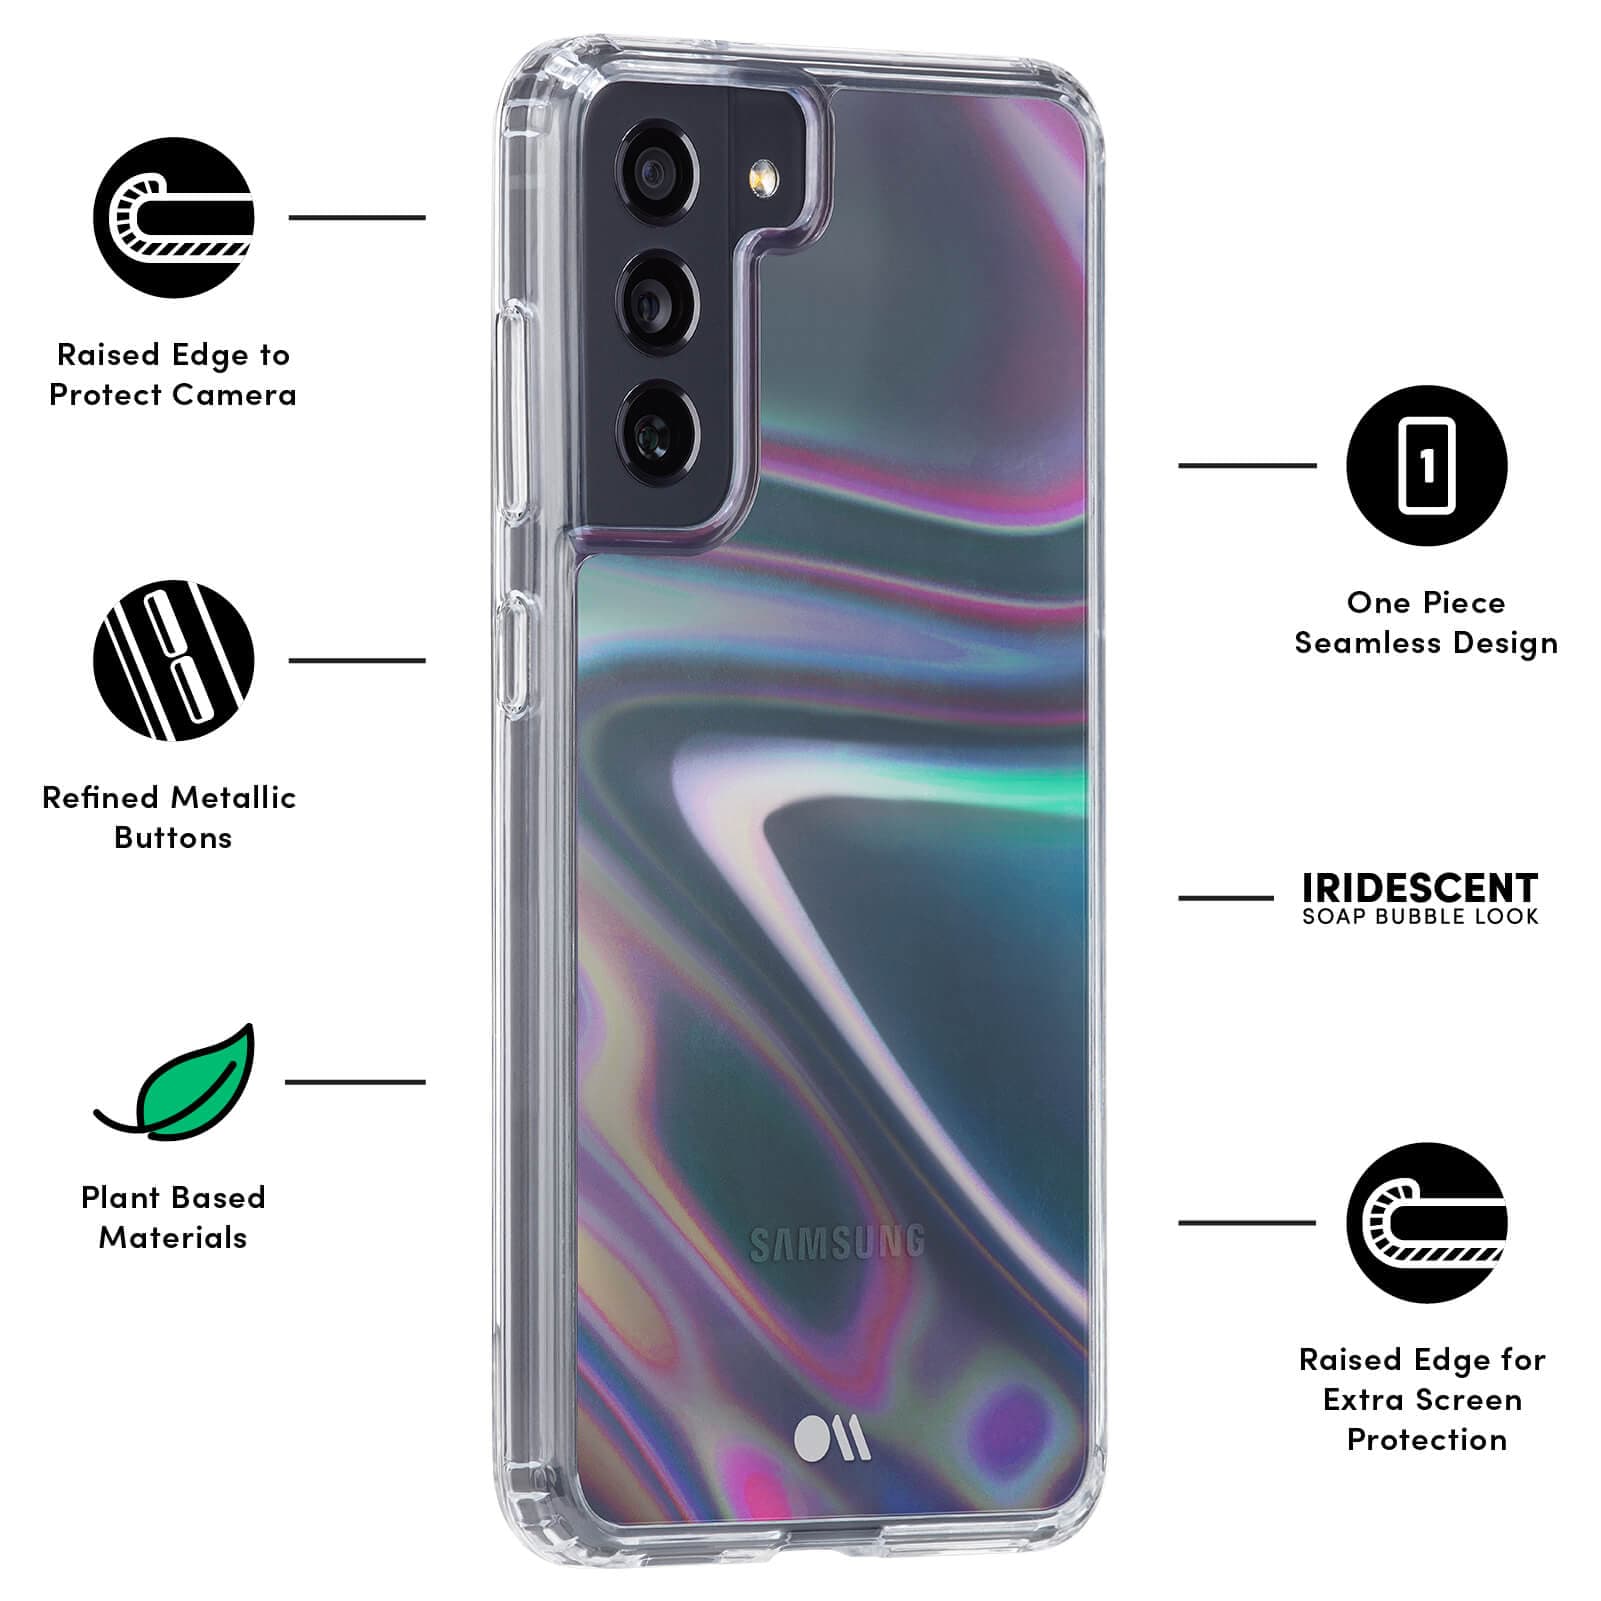 FEATURES: RAISED EDGE TO PROTECT CAMERA, REFINED METALLIC BUTTONS, PLANT BASED MATERIALS, ONE PIECE SEAMLESS DESIGN, IRIDESCENT SOAP BUBBLE LOOK, RAISED EDGE FO EXTRA SCREEN PROTECTION. COLOR::SOAP BUBBLE